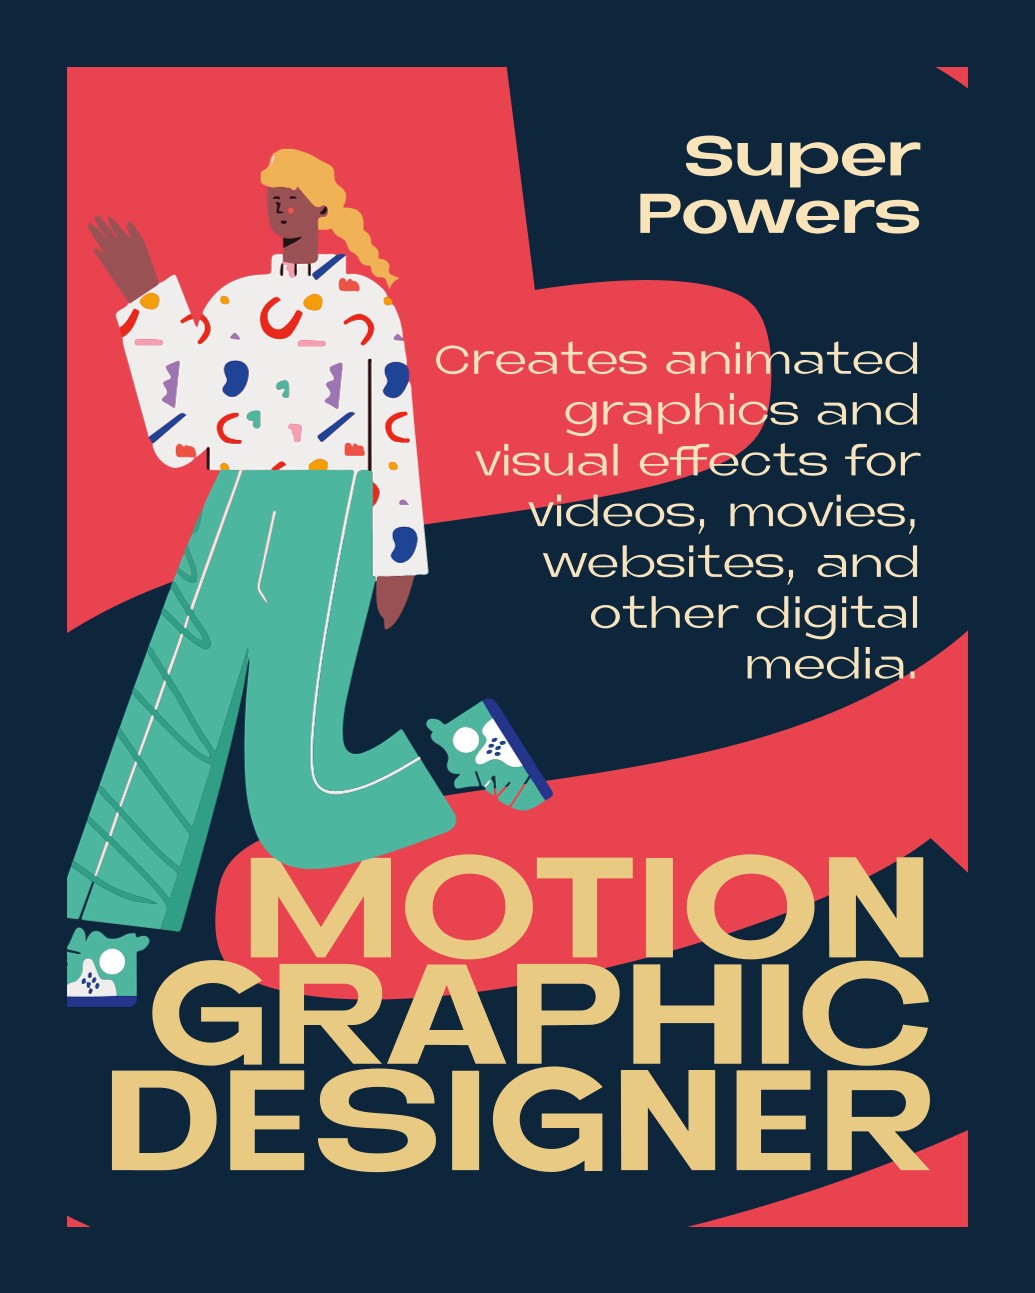 MOTION GRAPHIC DESIGNER – Super Powers: Creates animated graphics and visual effects for videos, movies, websites, and other digital media.
